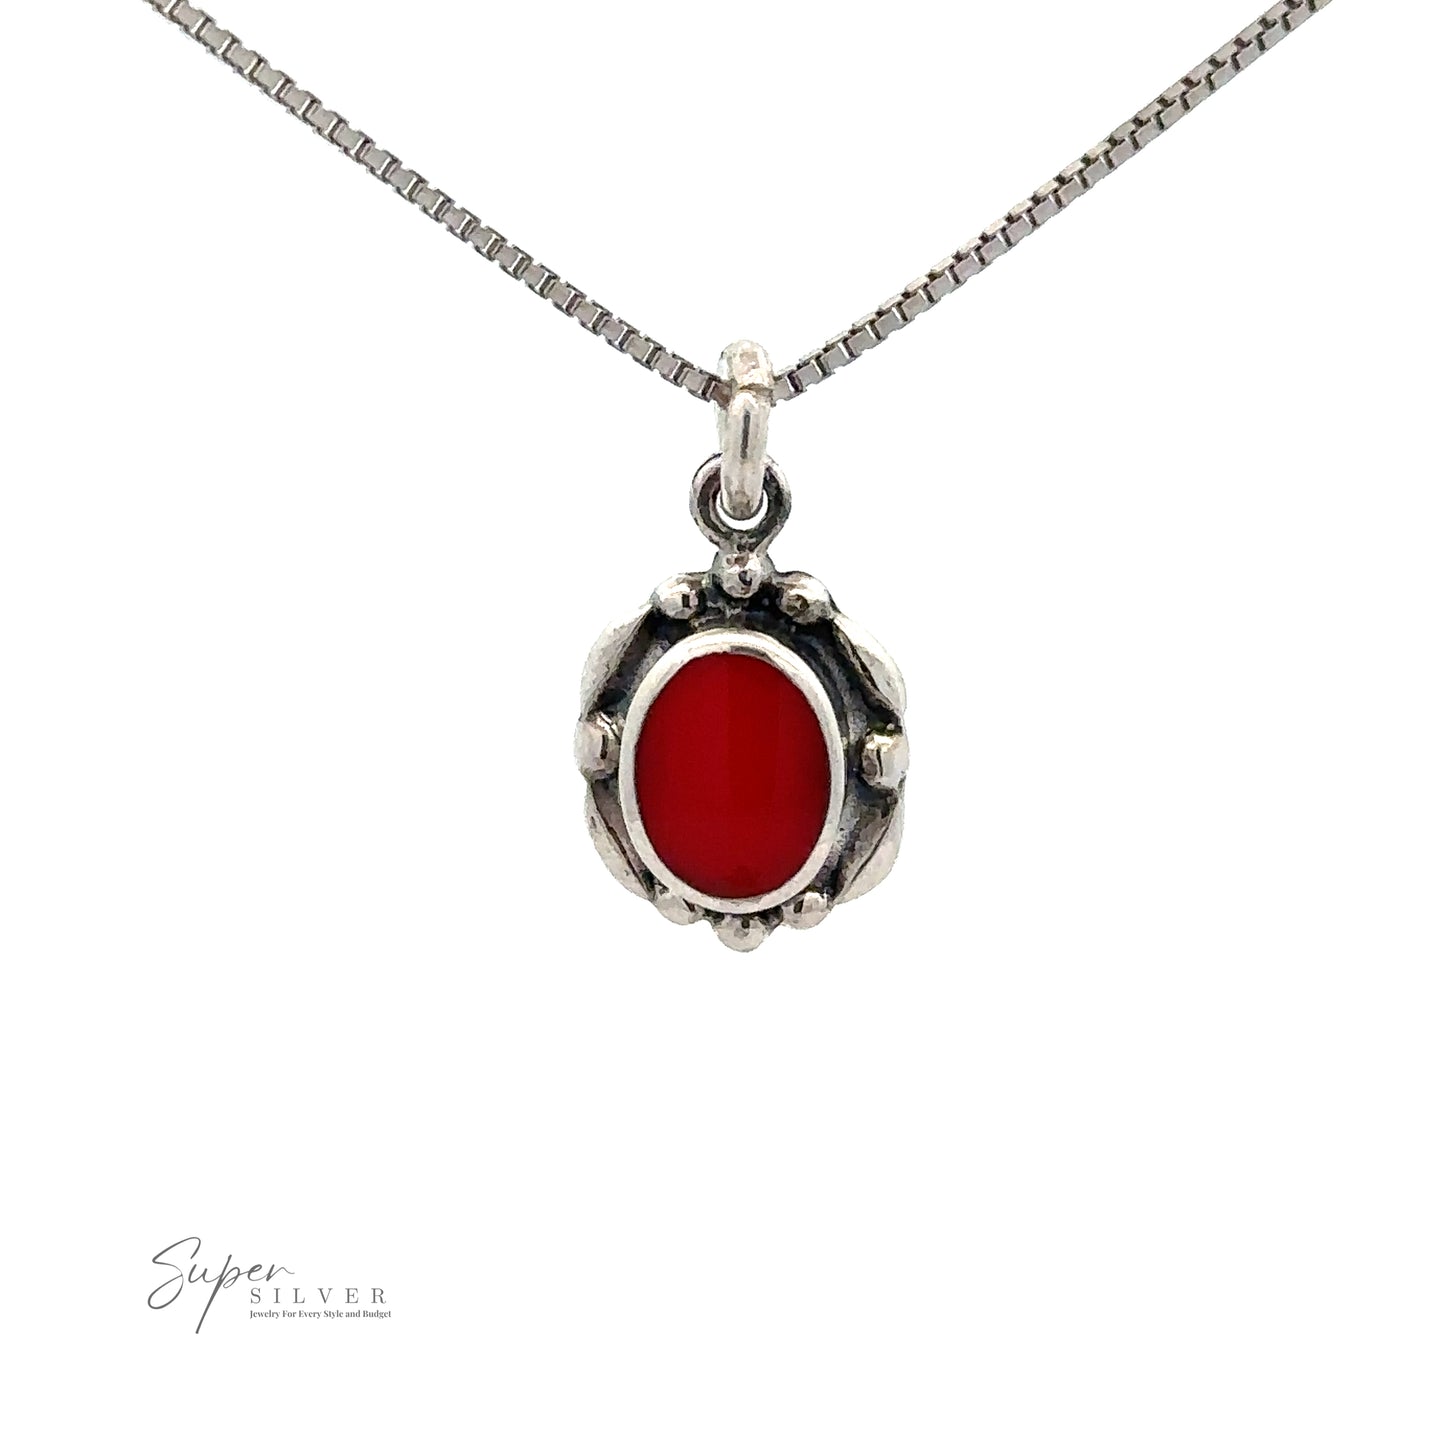 
                  
                    Beautiful Oval Stone Pendant With Silver Border: A silver necklace with an oval red gemstone pendant, featuring a beaded border design. The thin chain is crafted in sterling silver with a box chain style.
                  
                